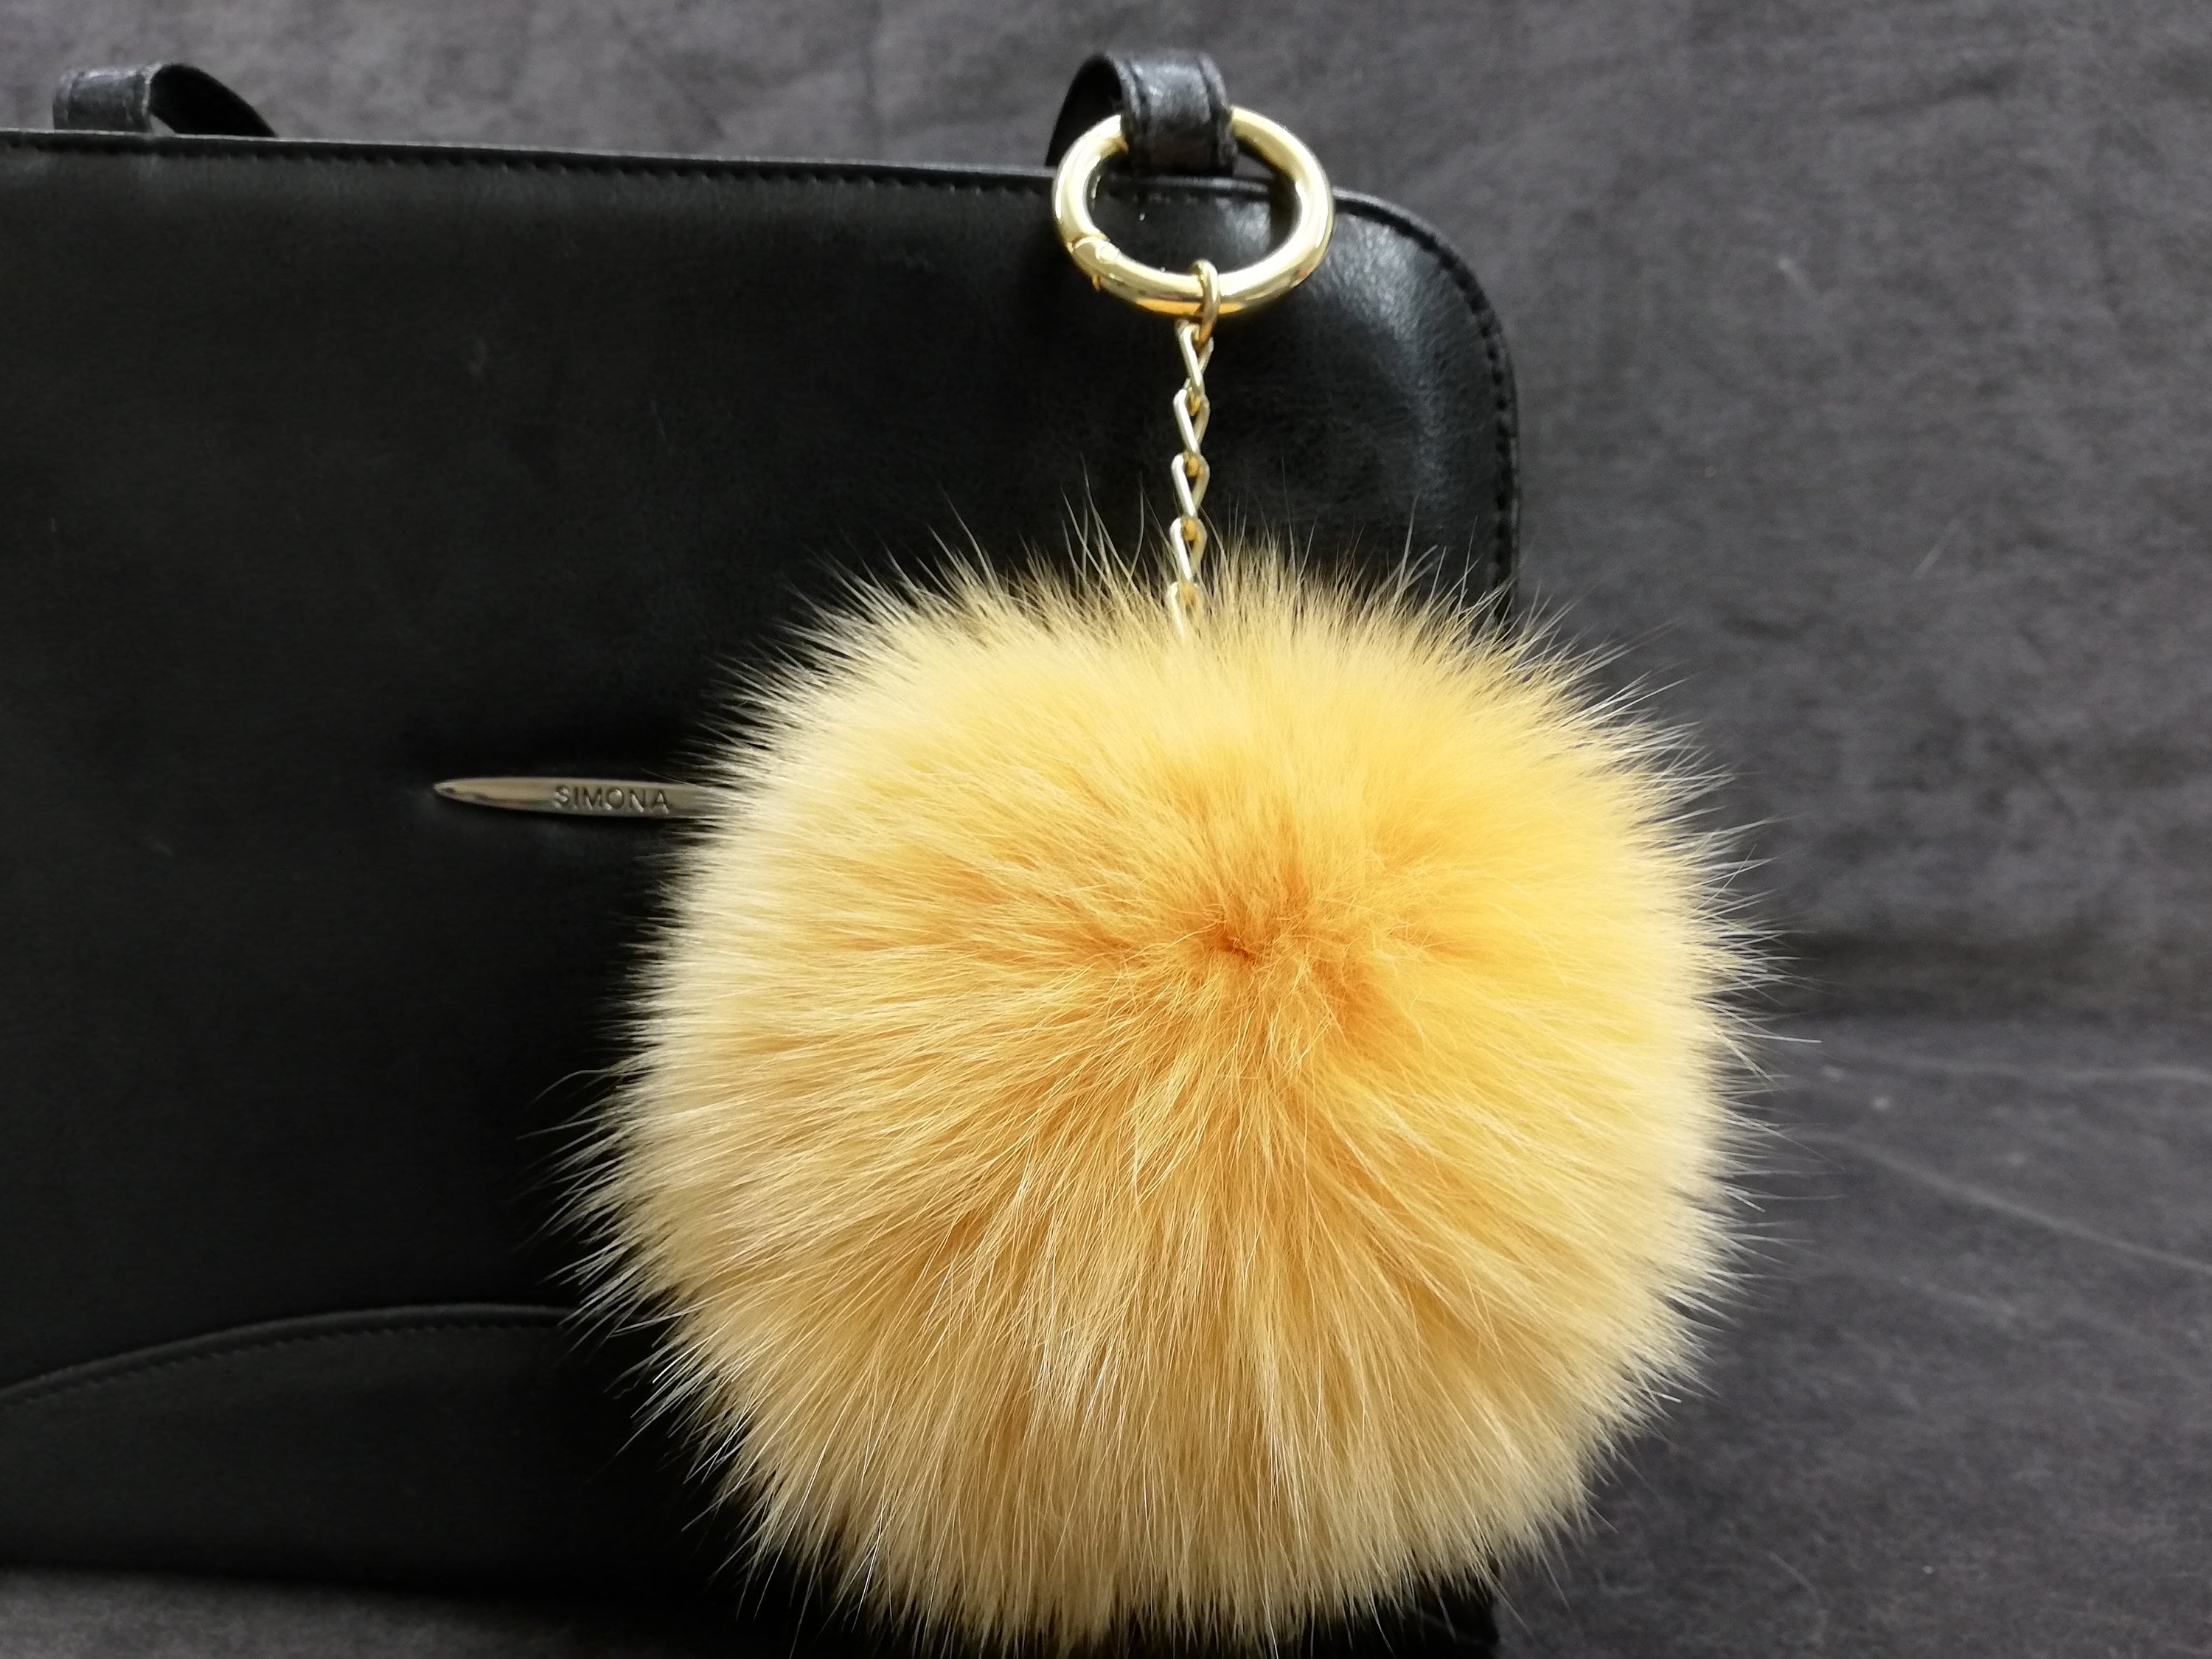 Fox fur bag charm dyed yellow color,real fur pom pom,real fox pom, bag  charm pom pom,pom pom keychain,real fur bag accessory, Gift for her